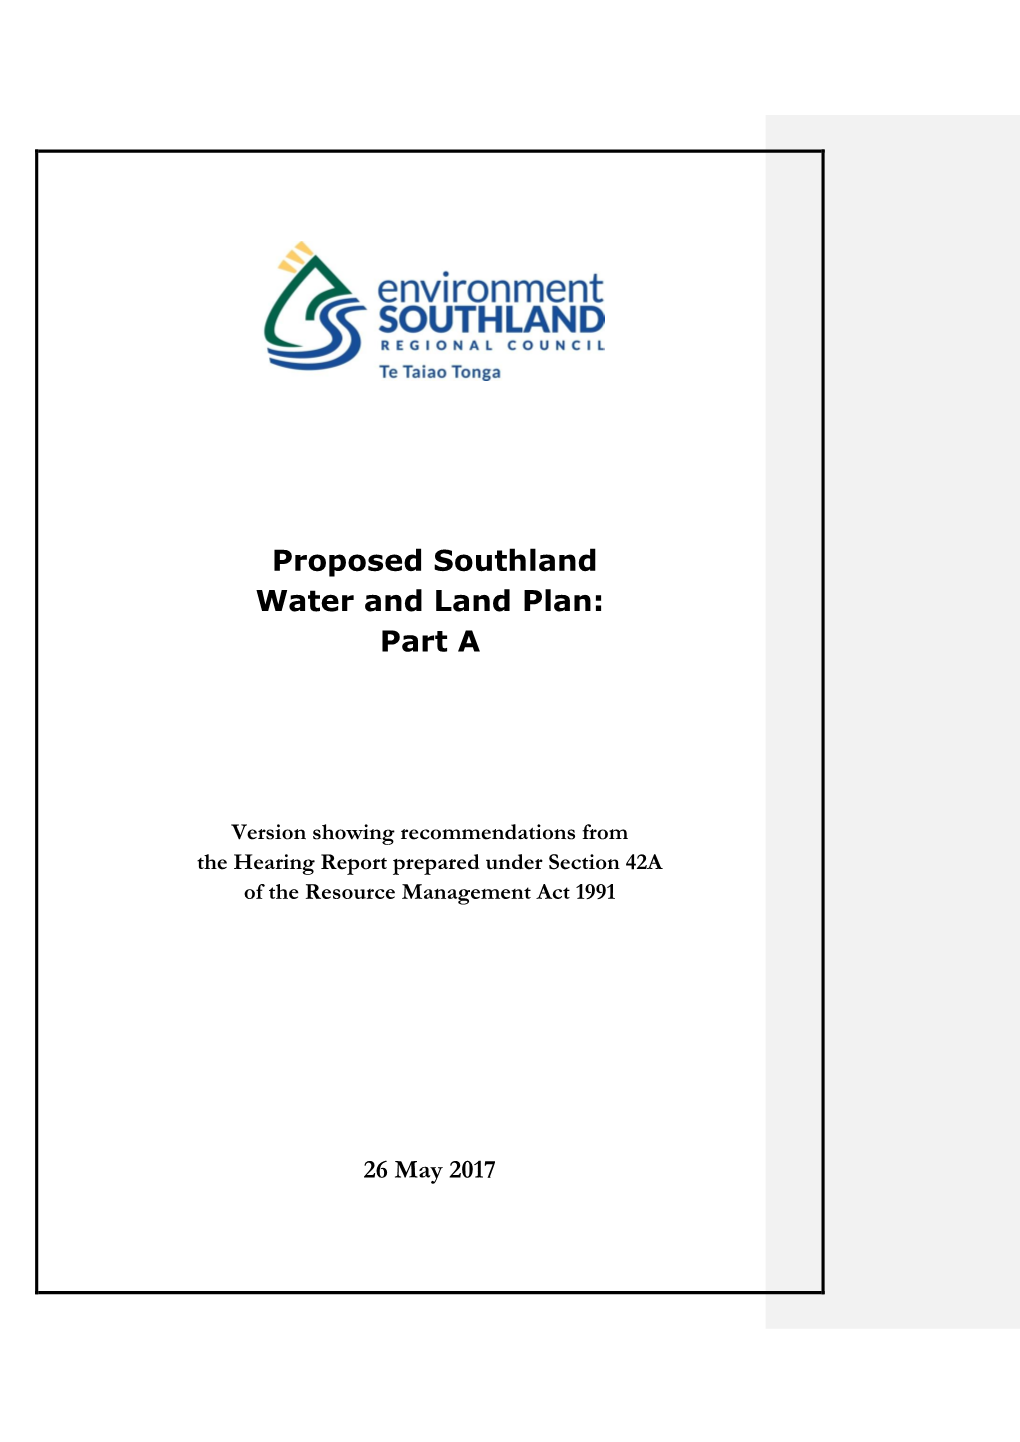 Proposed Southland Water and Land Plan: Part A